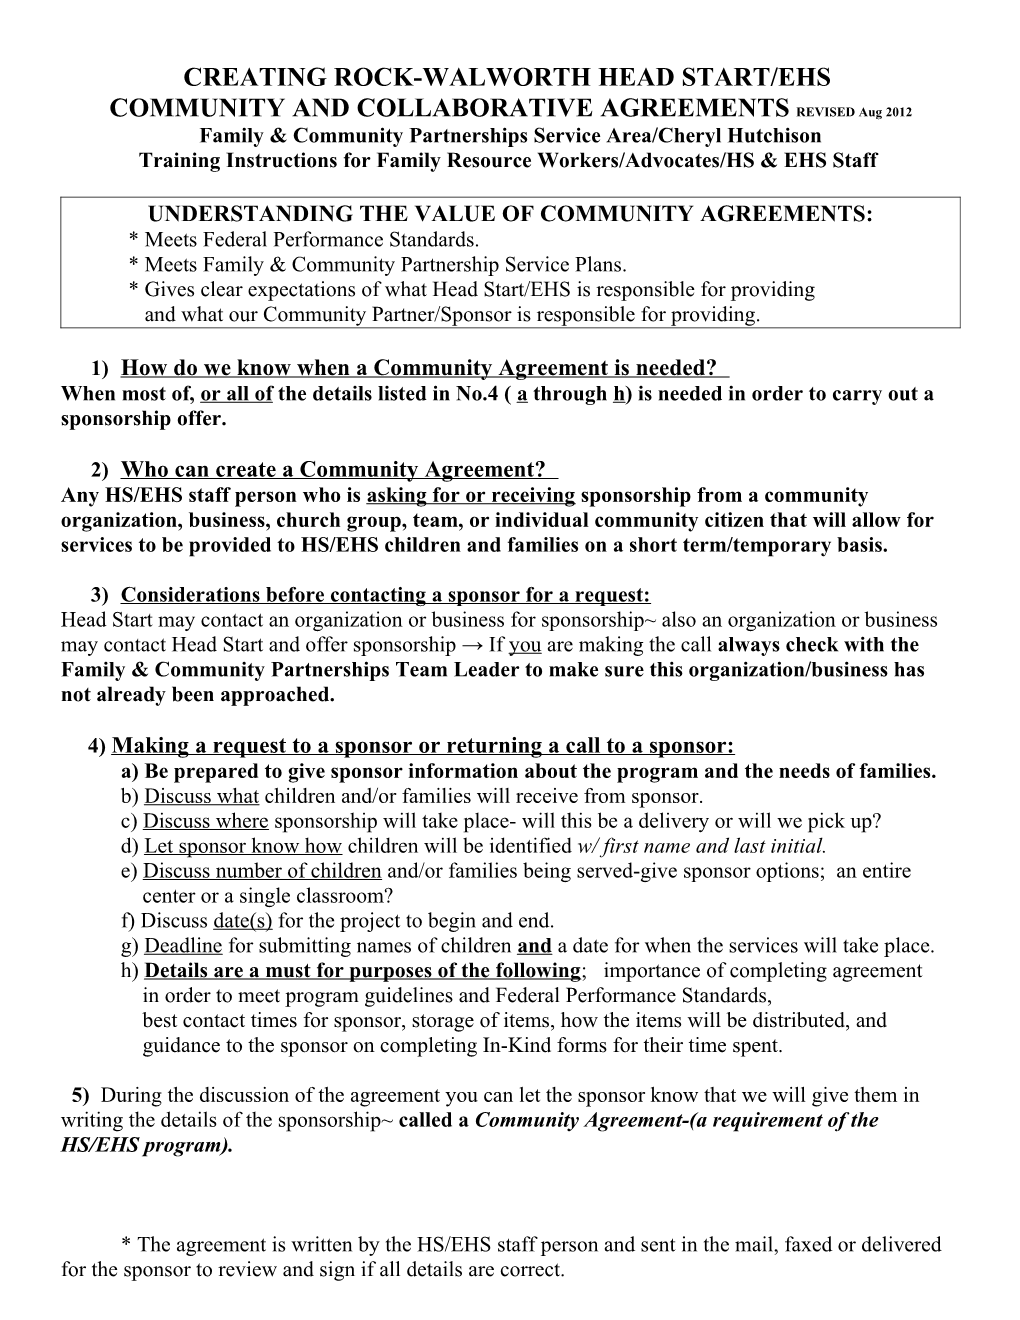 Family & Community Agreements